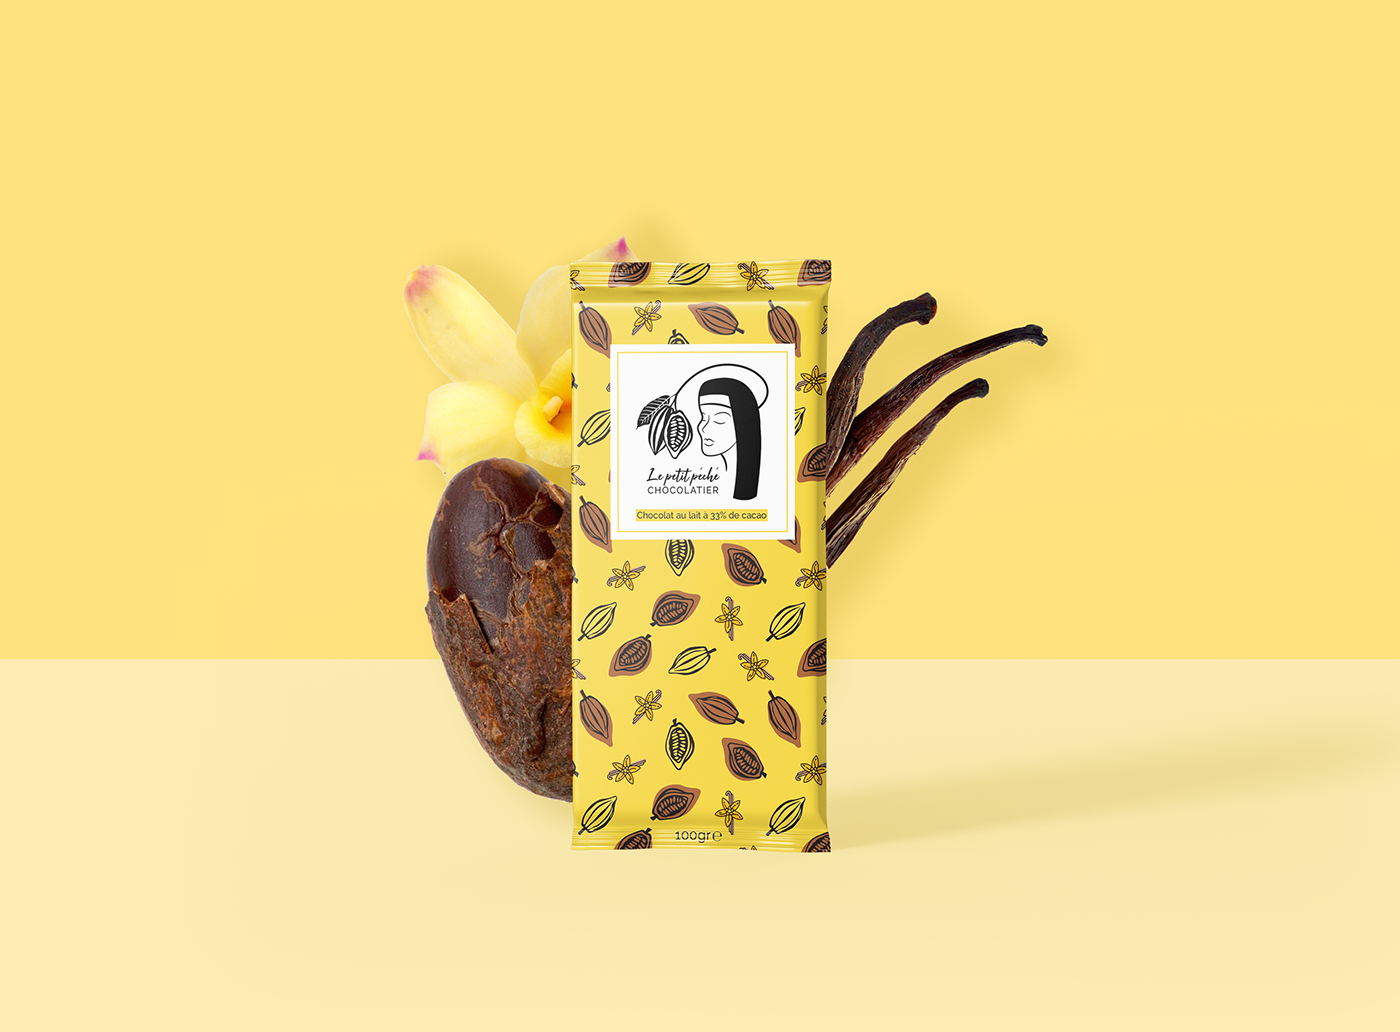 ILLUSTRATION  Packaging marque branding  graphic design  Emballages chocolat chocolate graphisme